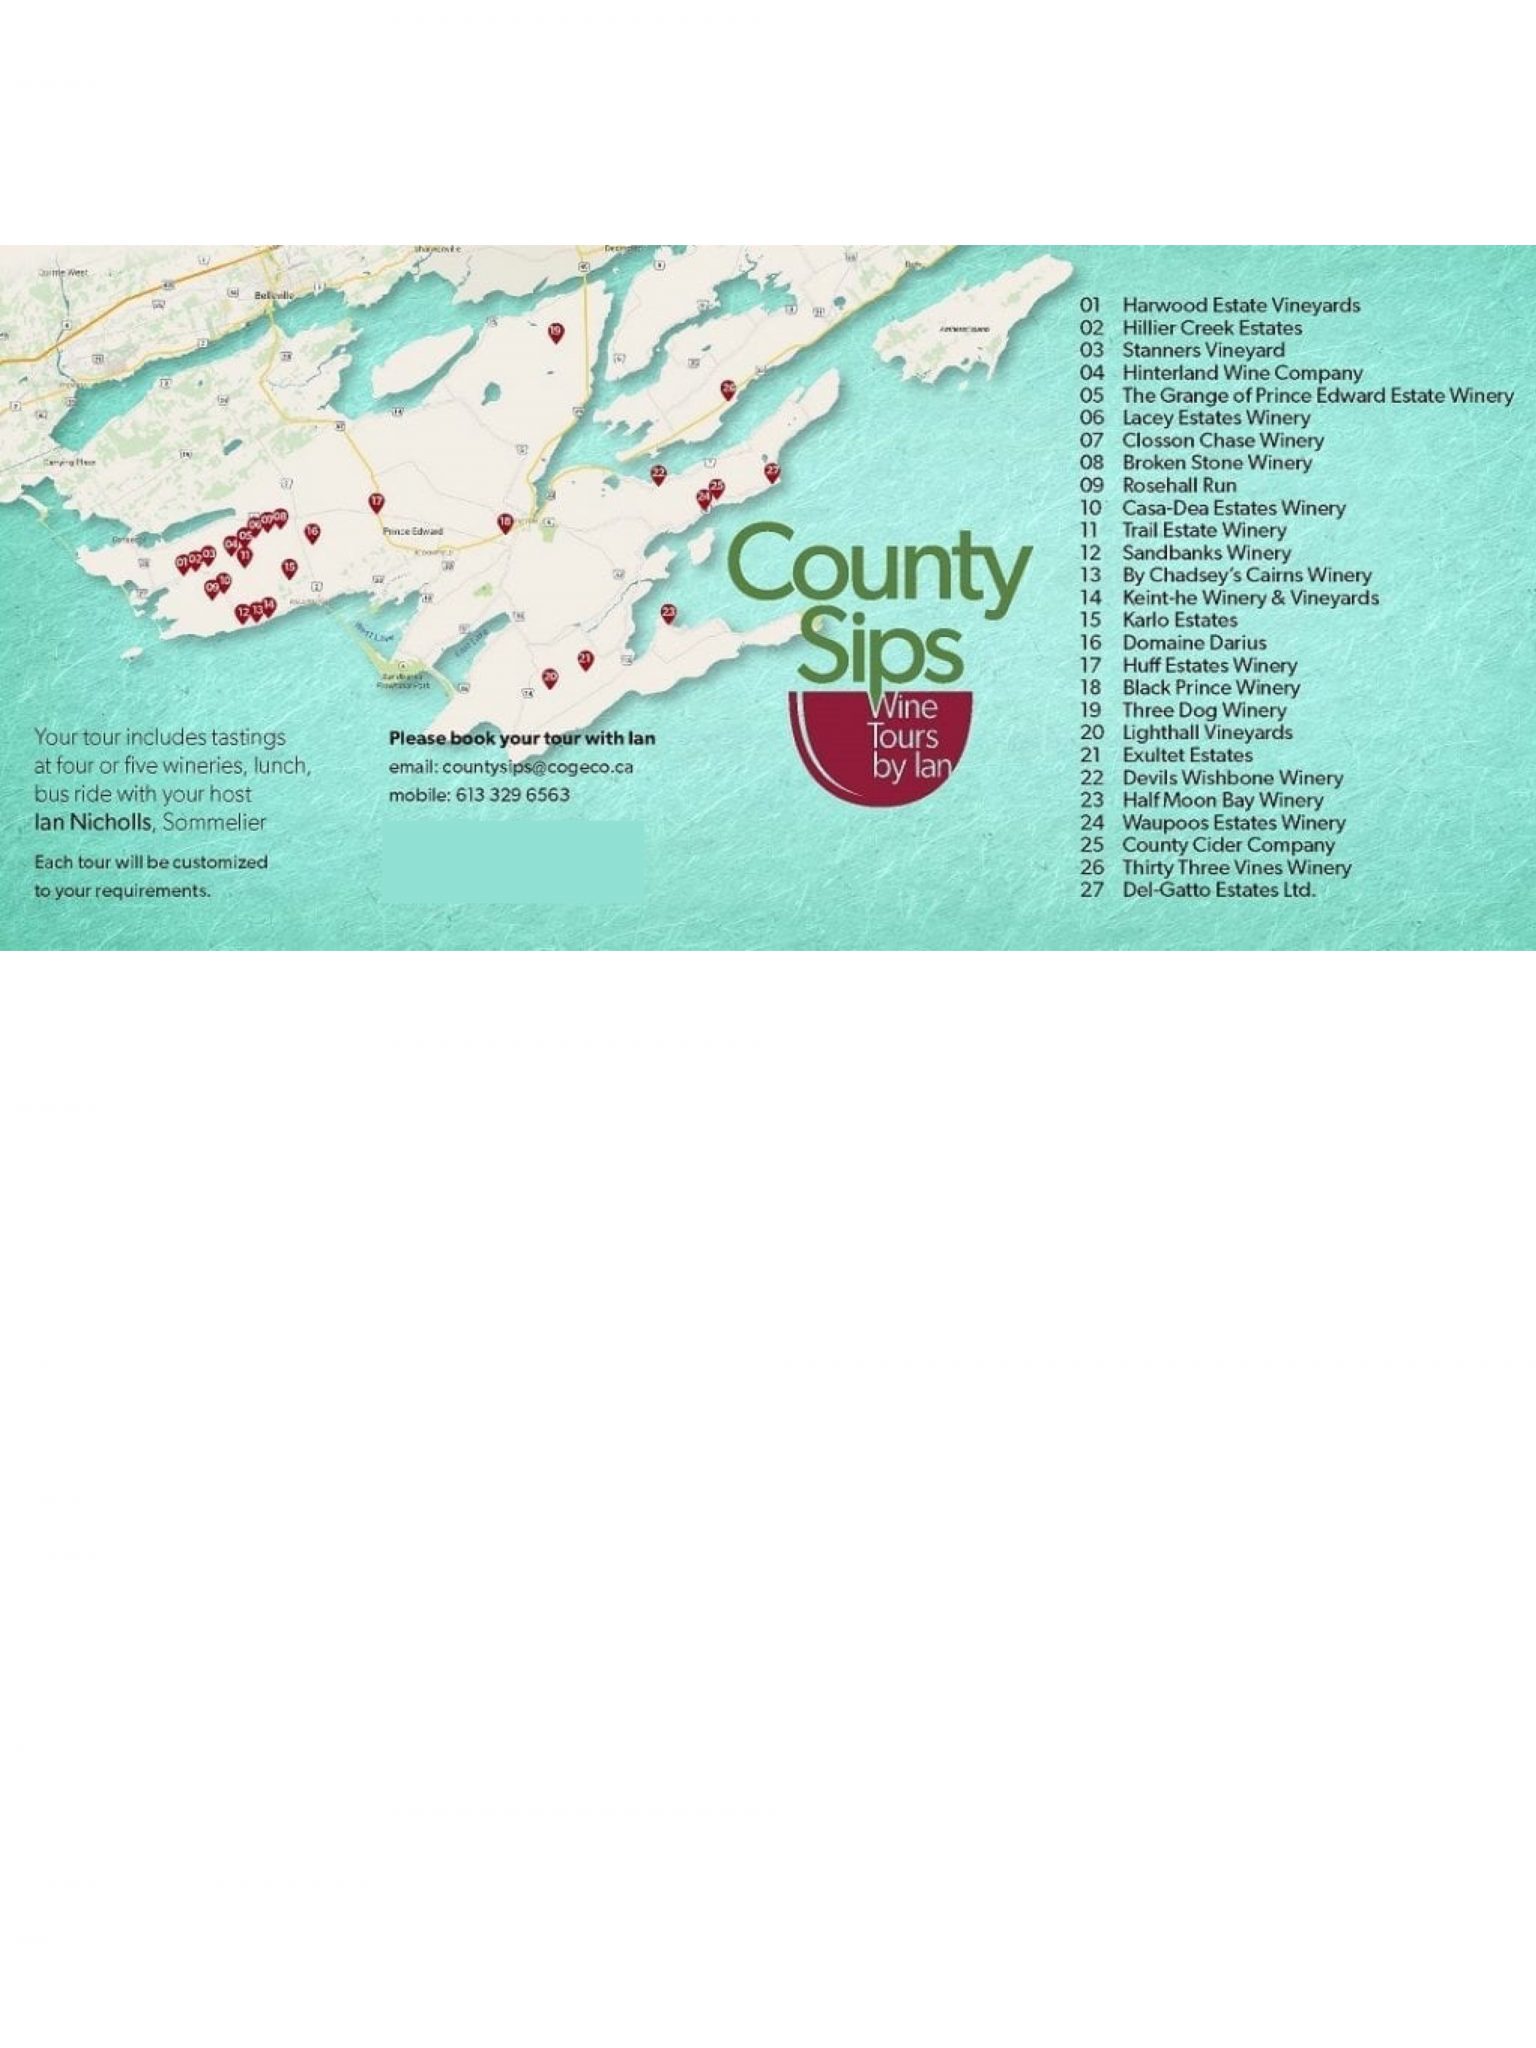  Map of Prince Edward County Wineries